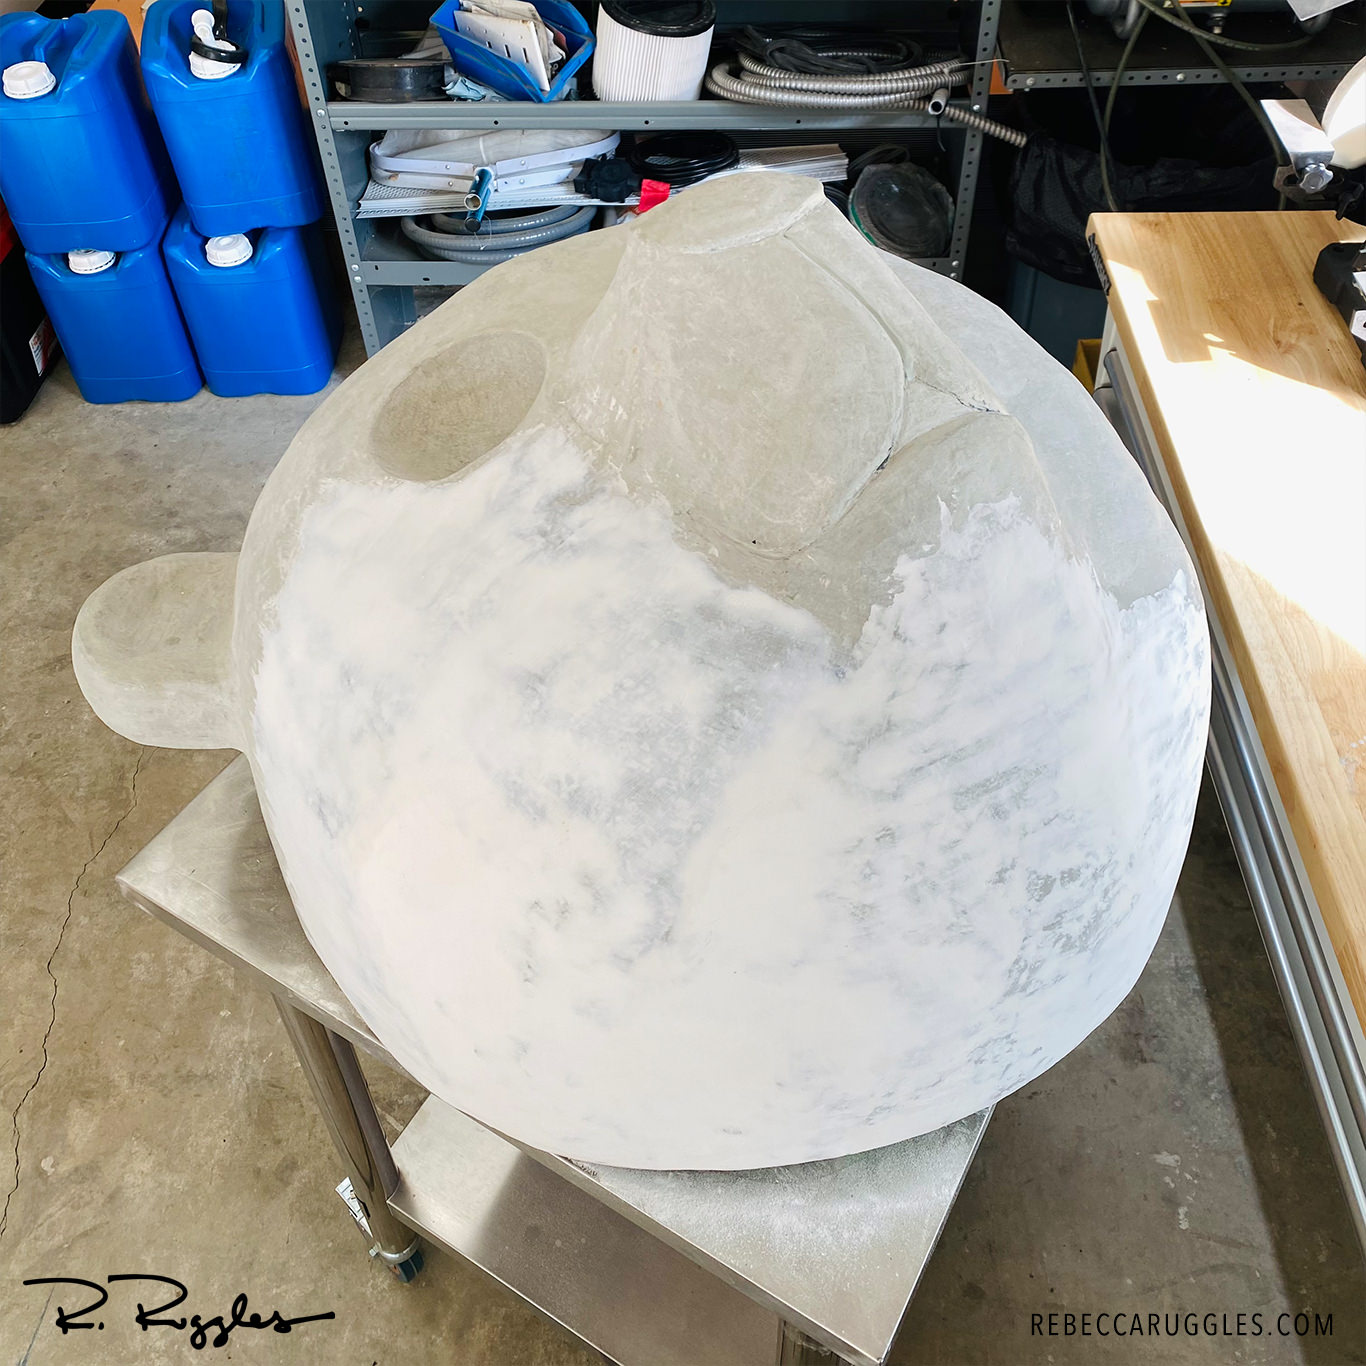 Troweling joint compound onto the giant panda head sculpture to smooth the surface.